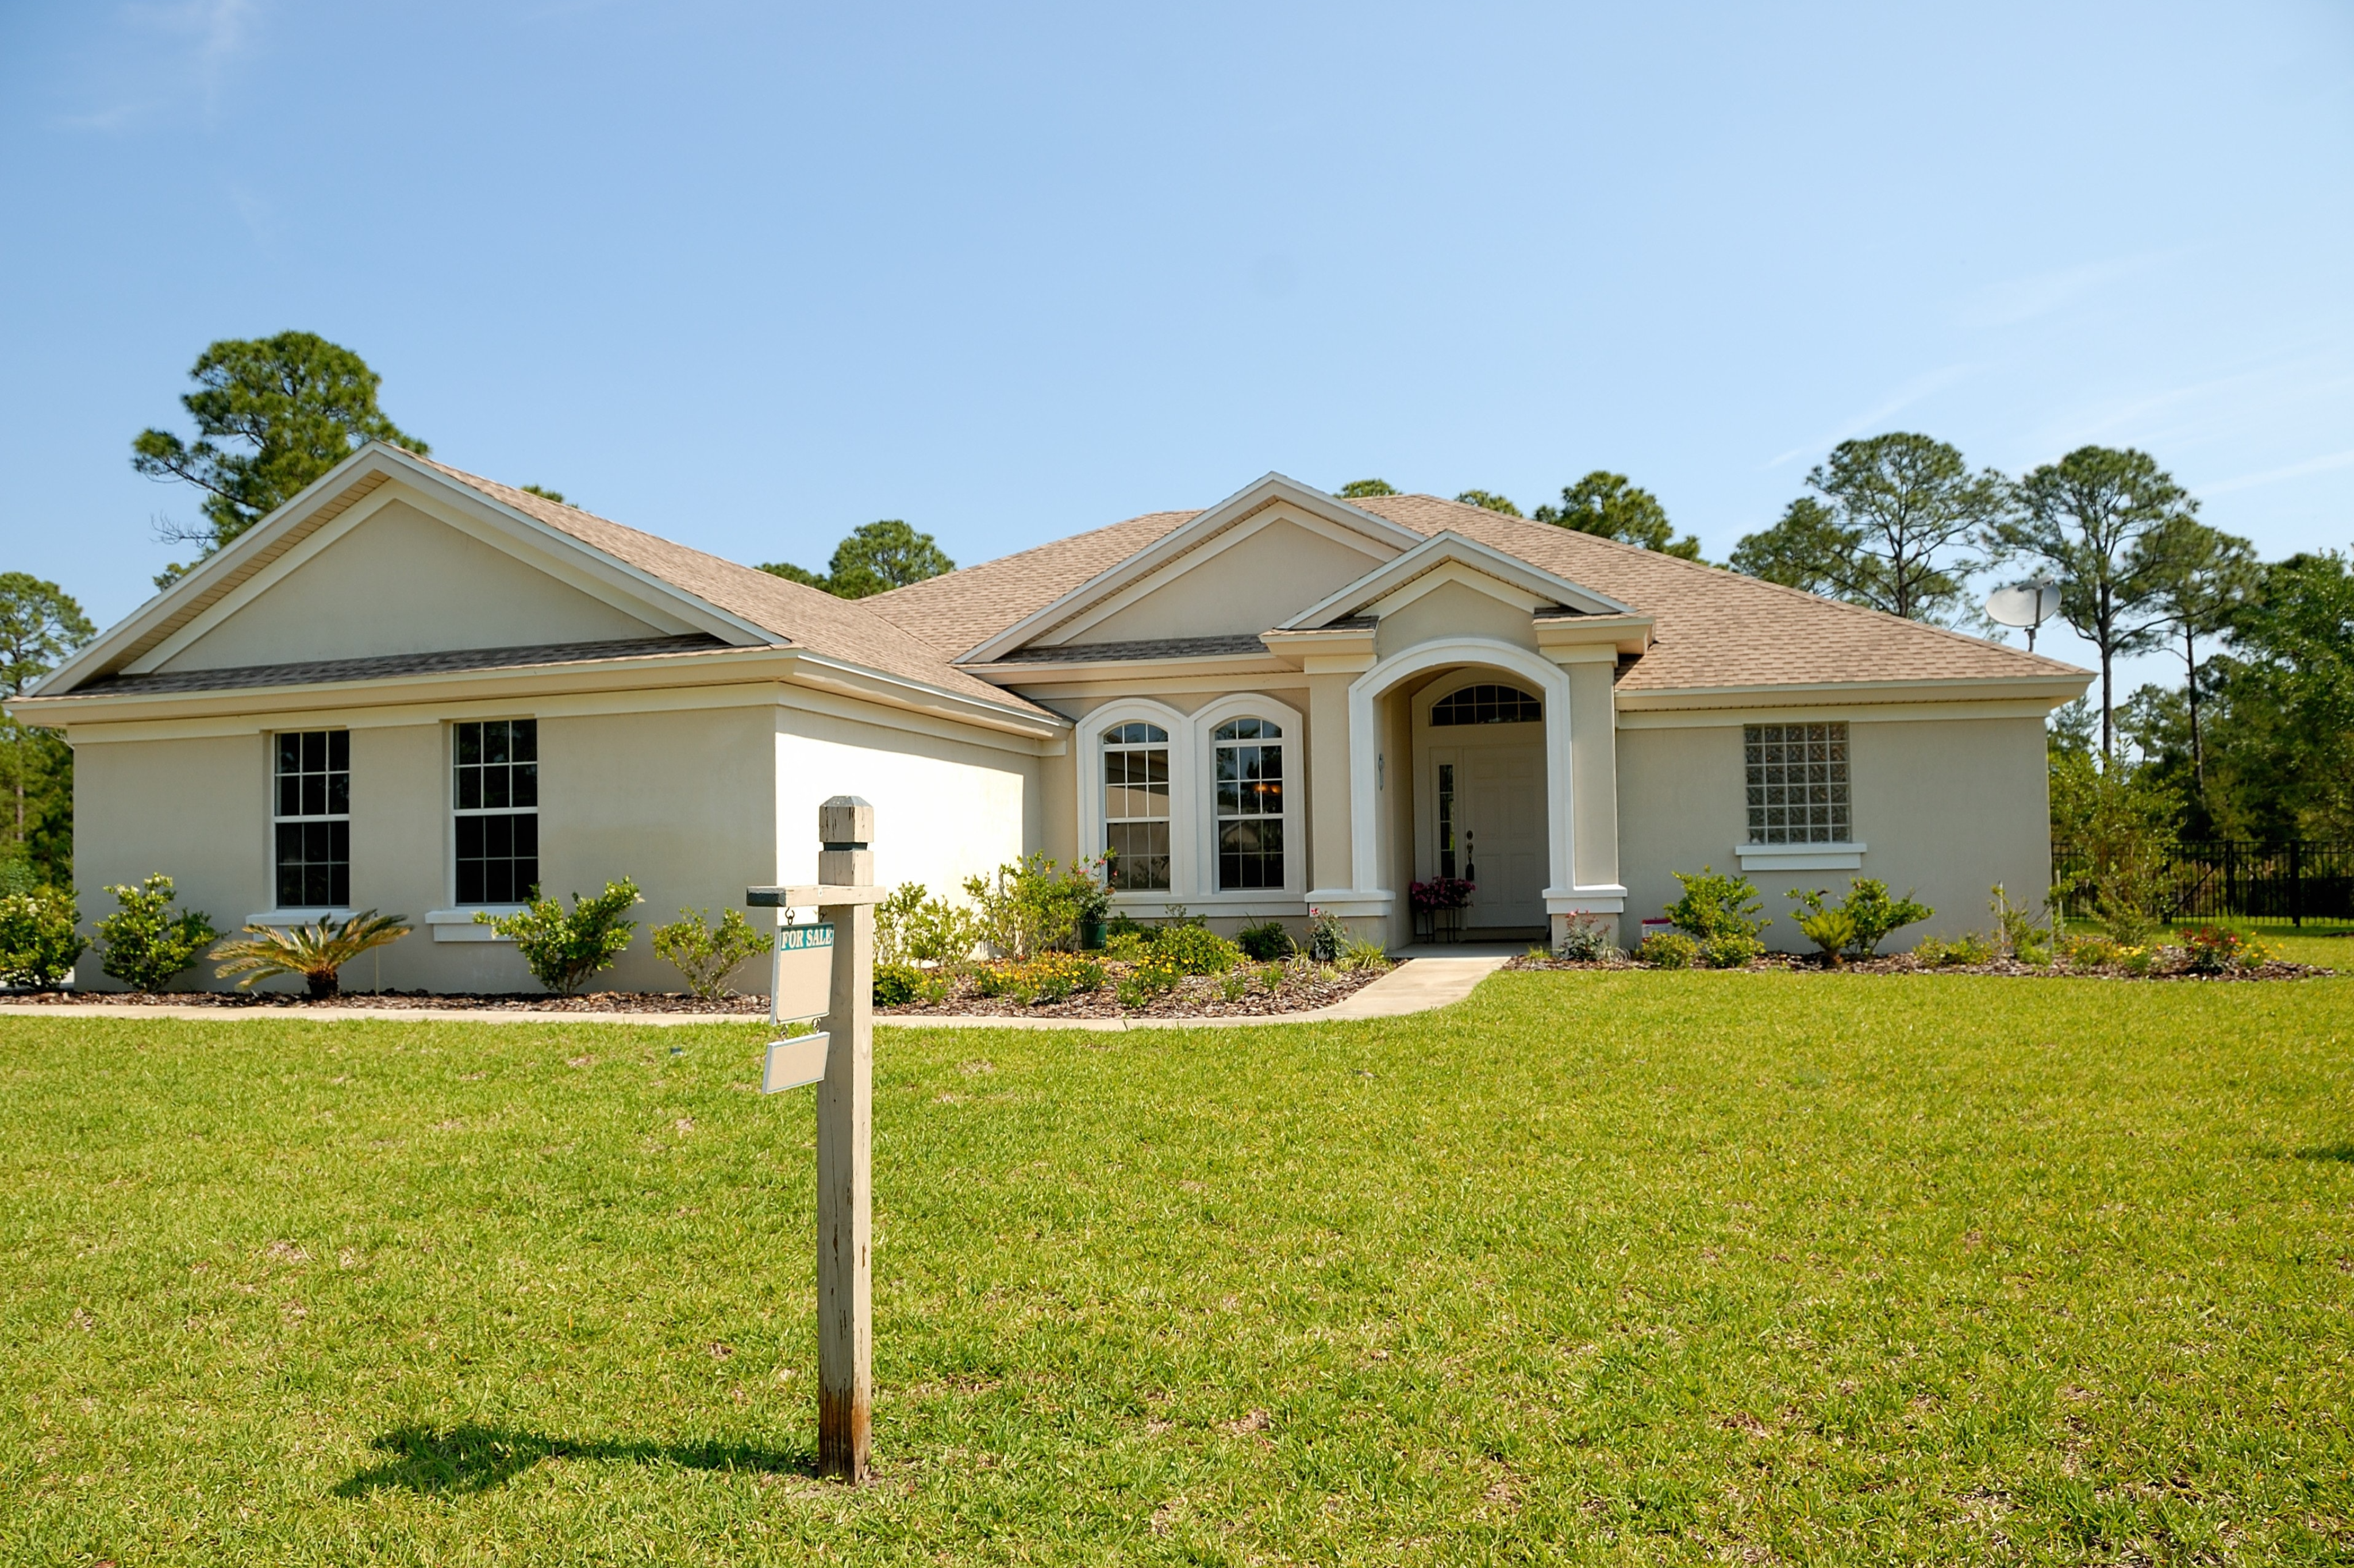 Home Insurance in Baton Rouge